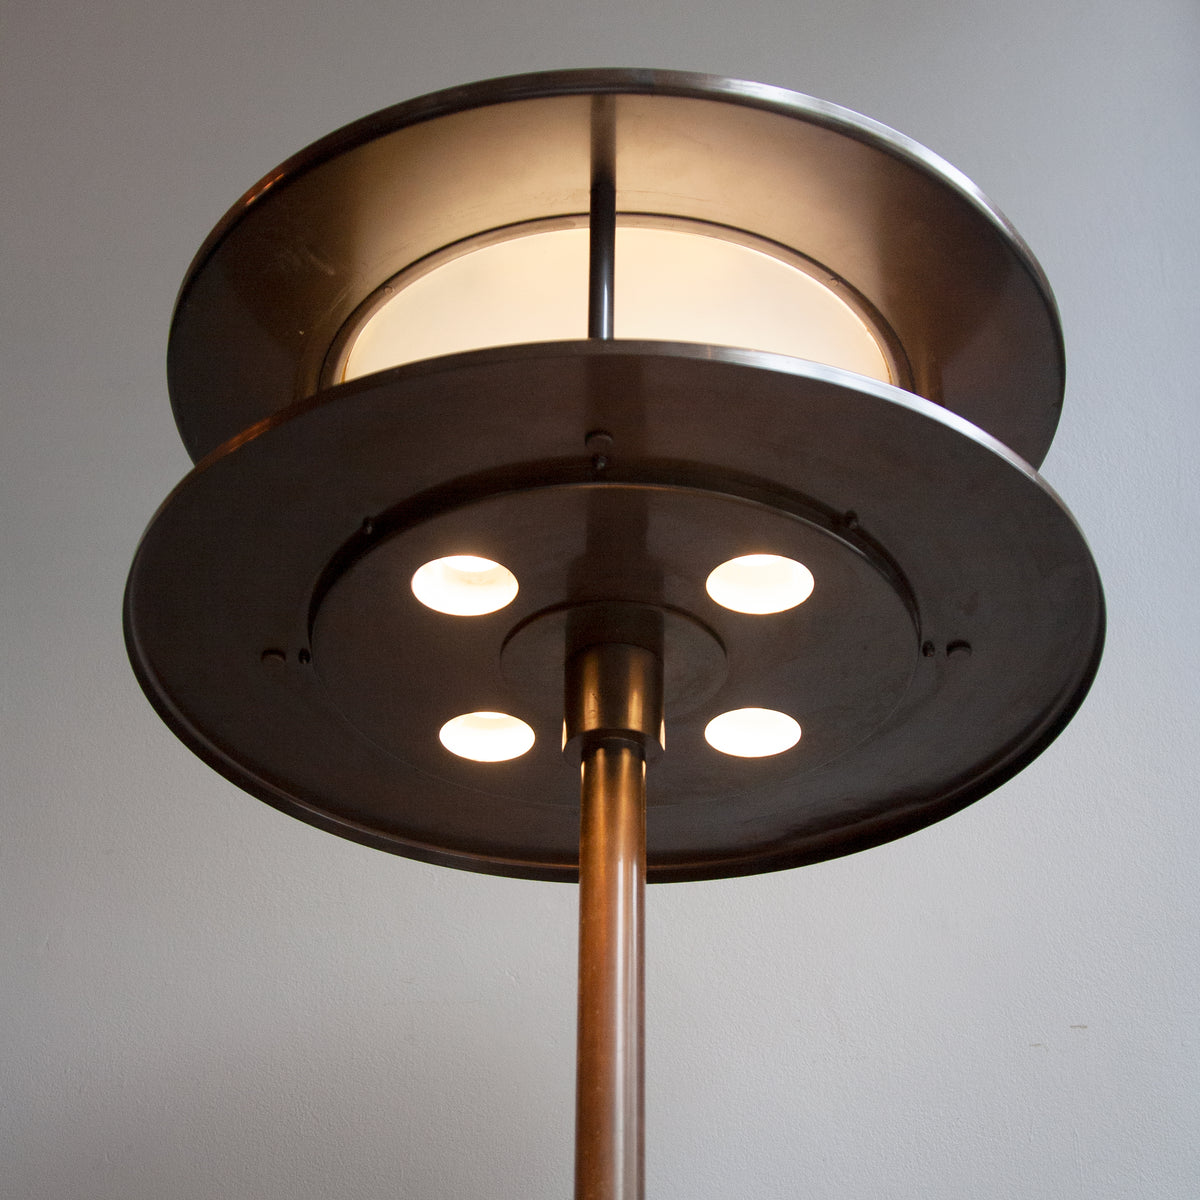 Unique Oversized Bank Lights / Britain, Early-20th Century